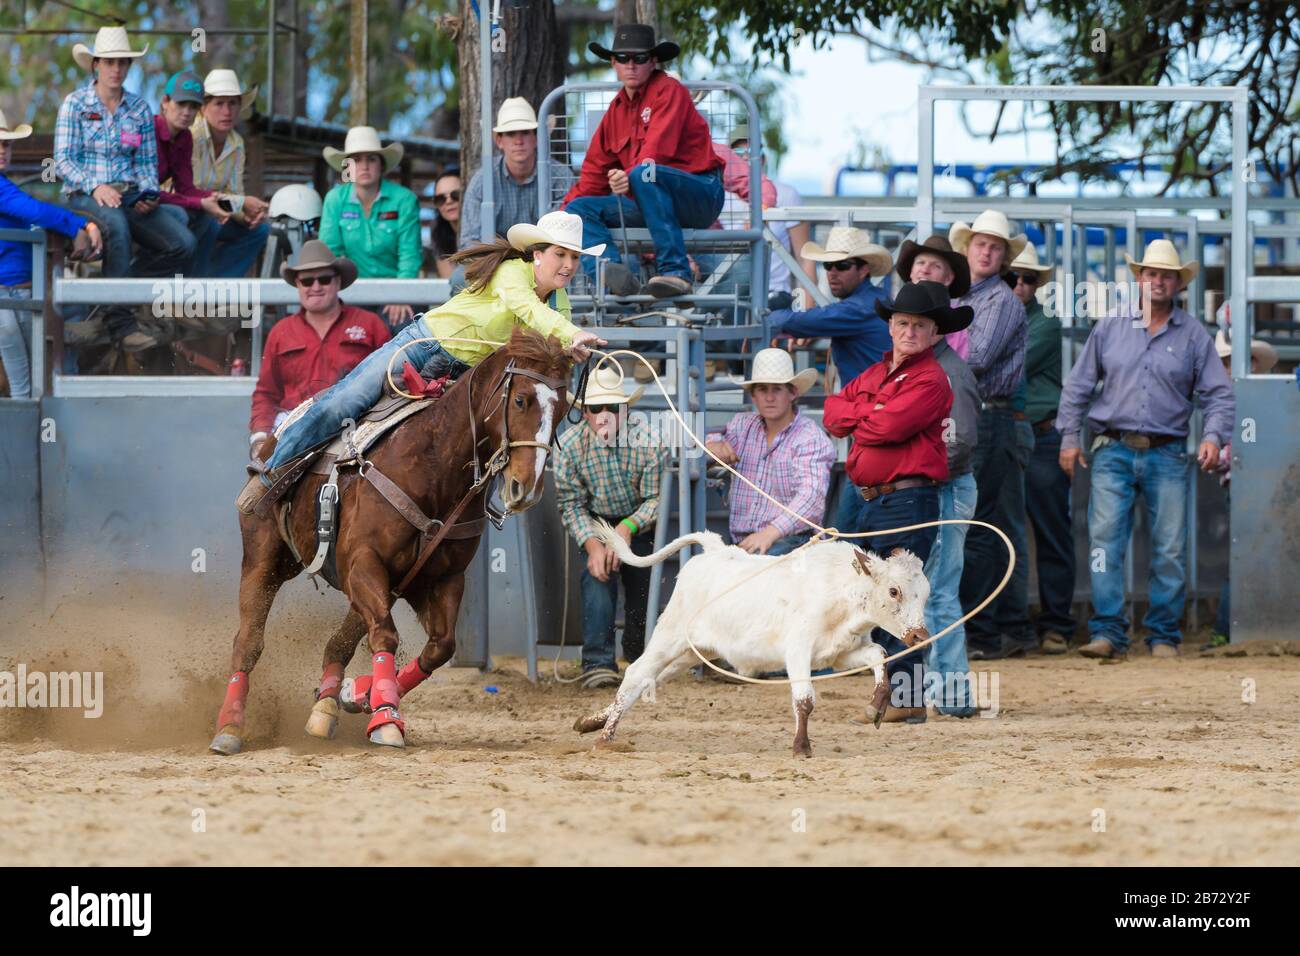 Action view of cowgirl competitor in full flight with lasoo in mid air circling the running calf' head as judges and onlookers assess the run. Stock Photo